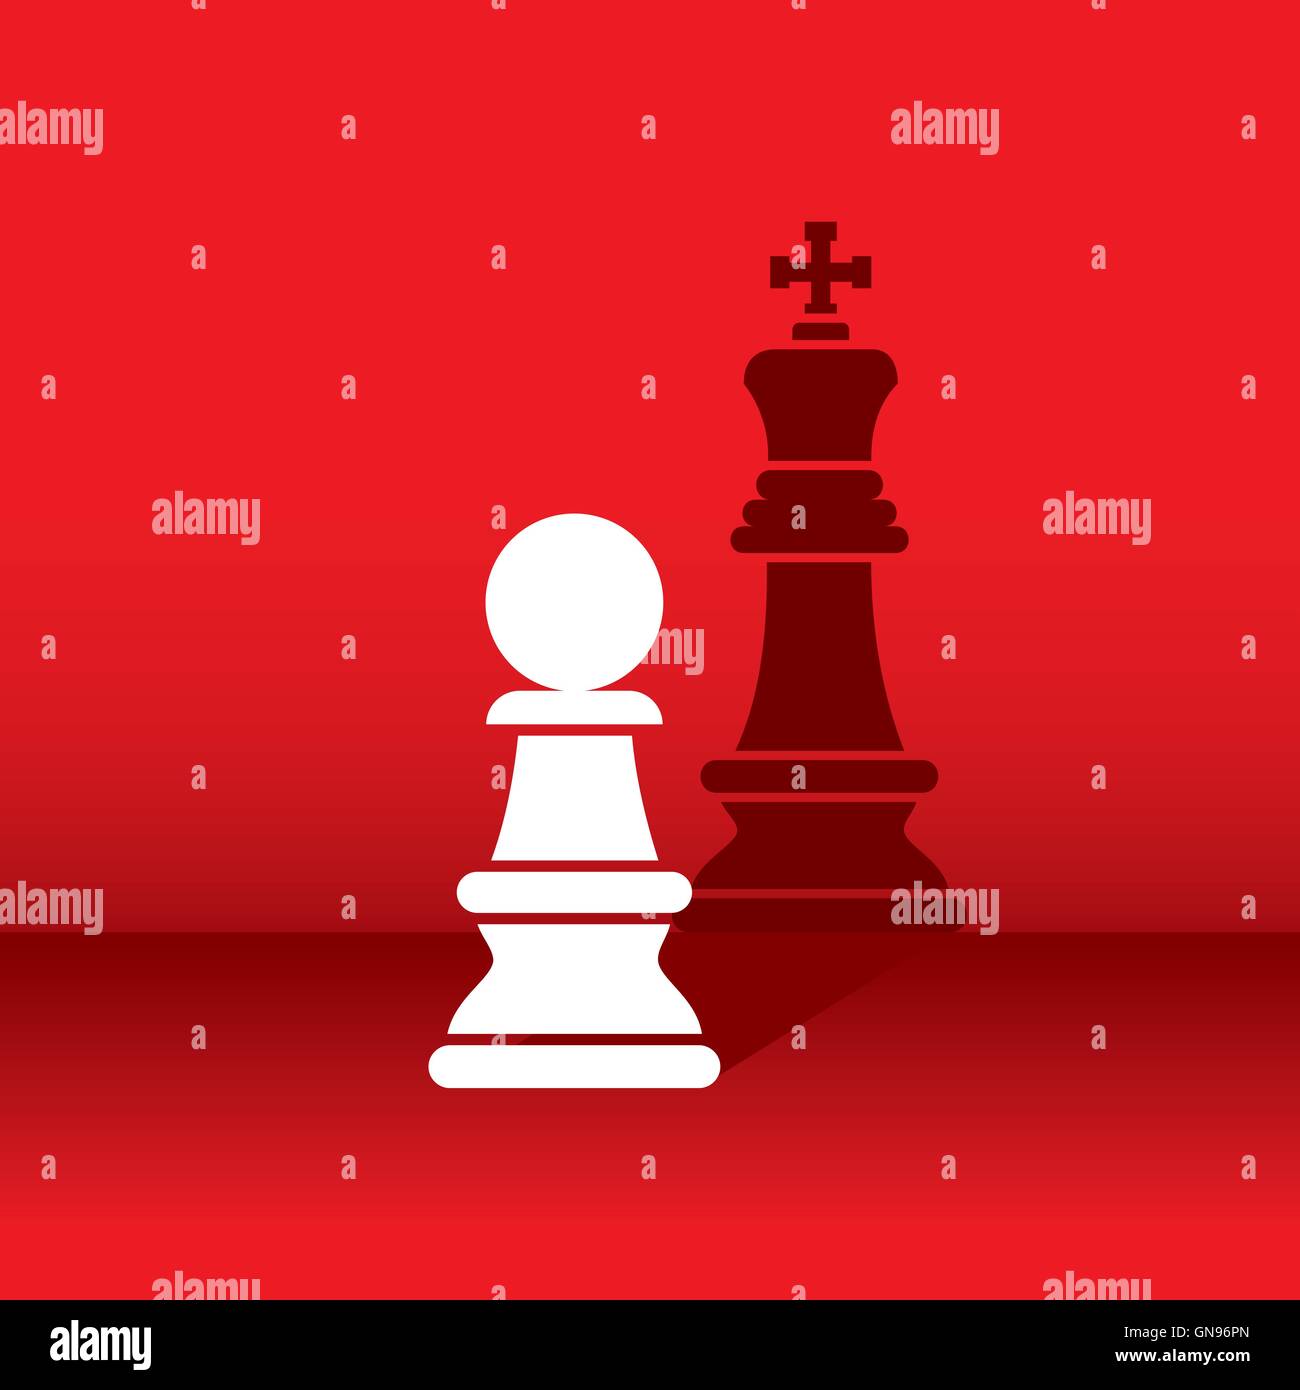 Chess Pieces Chalkboard Poster Design Royalty Free SVG, Cliparts